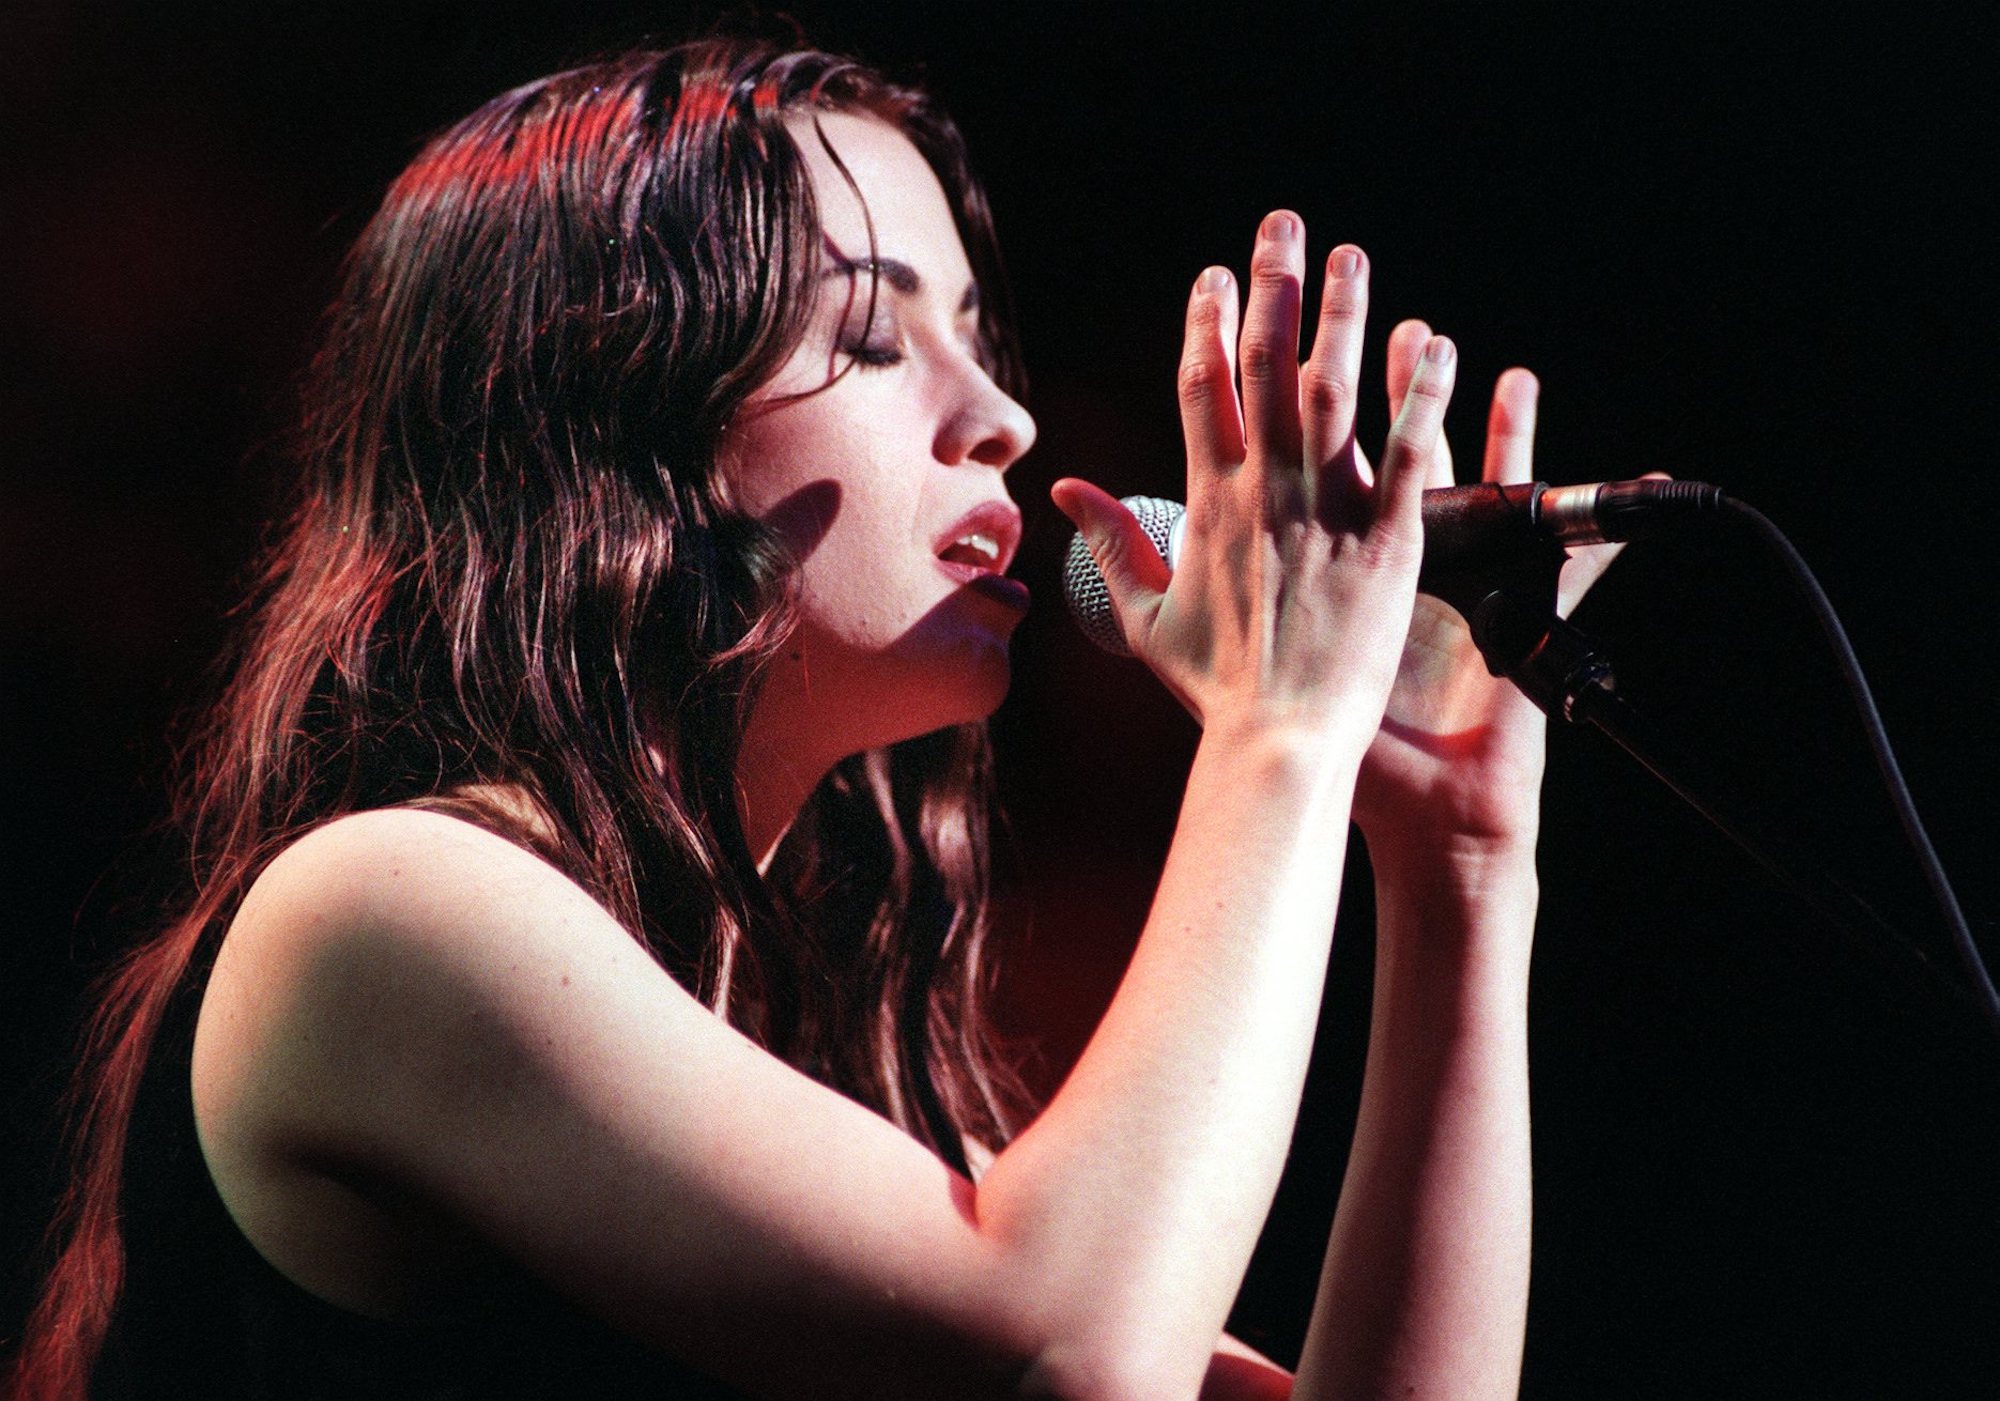 Alanis Morissette performing on stage during the KROQ 6th annual Almost Acoustic Christmas Concert on Dec. 18, 1995.